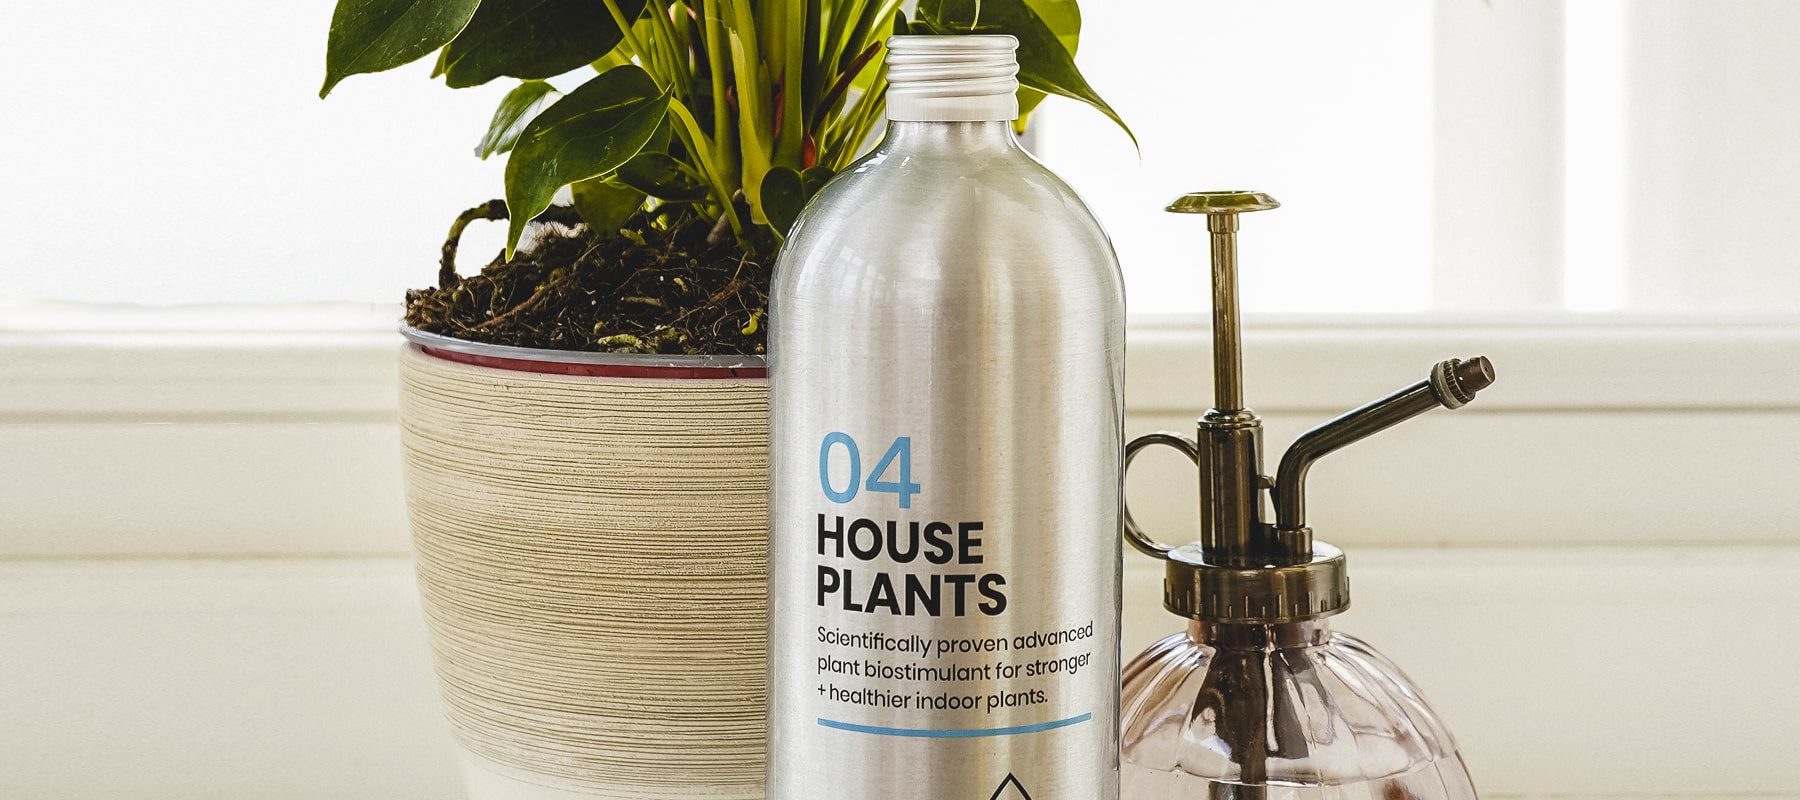 Can The Magic Molecule Co. products be used in pots and window boxes?